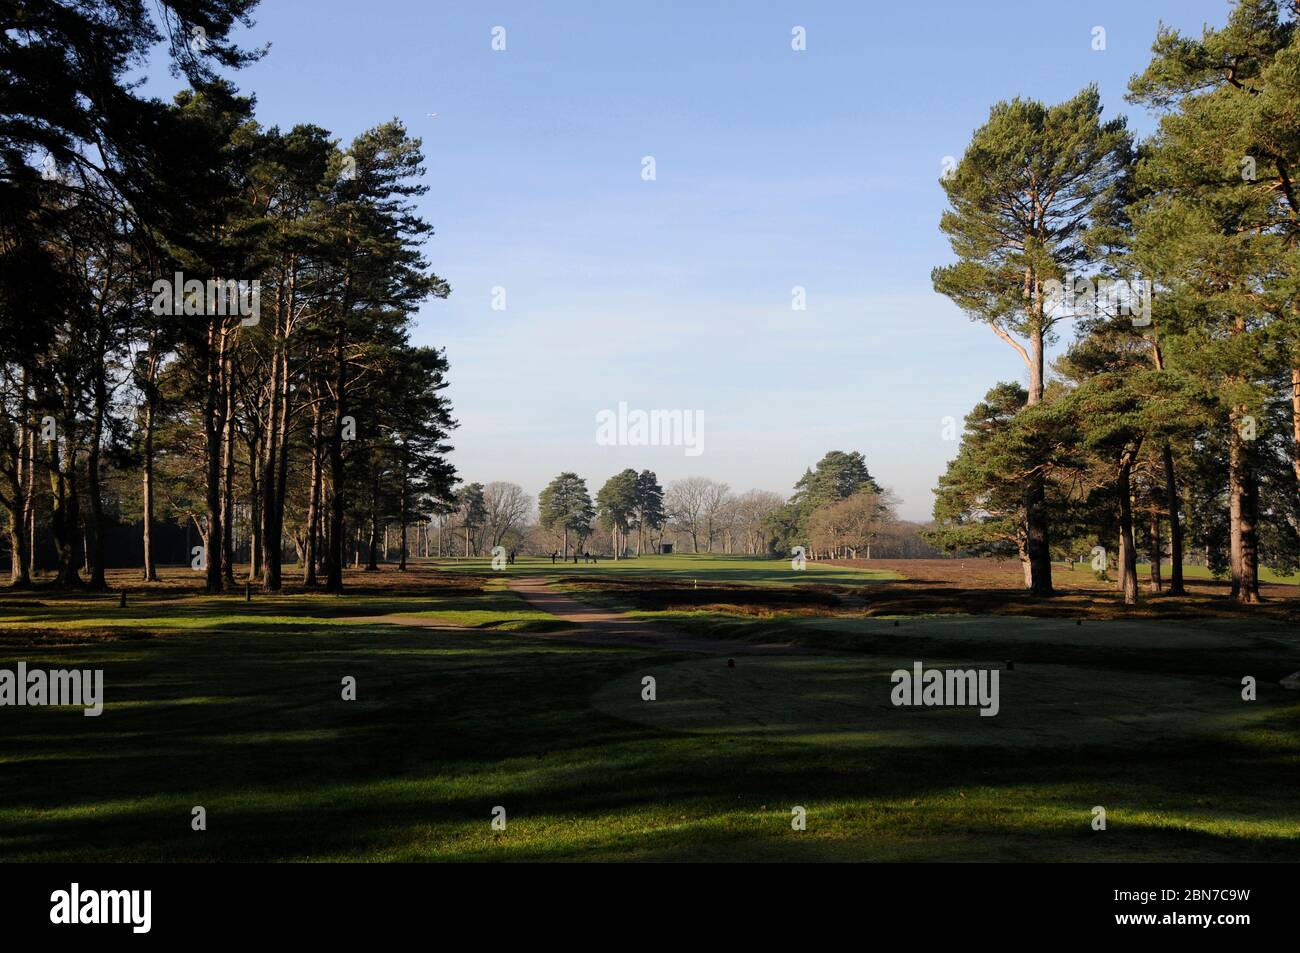 Vue du tee of the 12th Hole à Fairway, Woking Golf Club, Woking, Surrey, Angleterre Banque D'Images